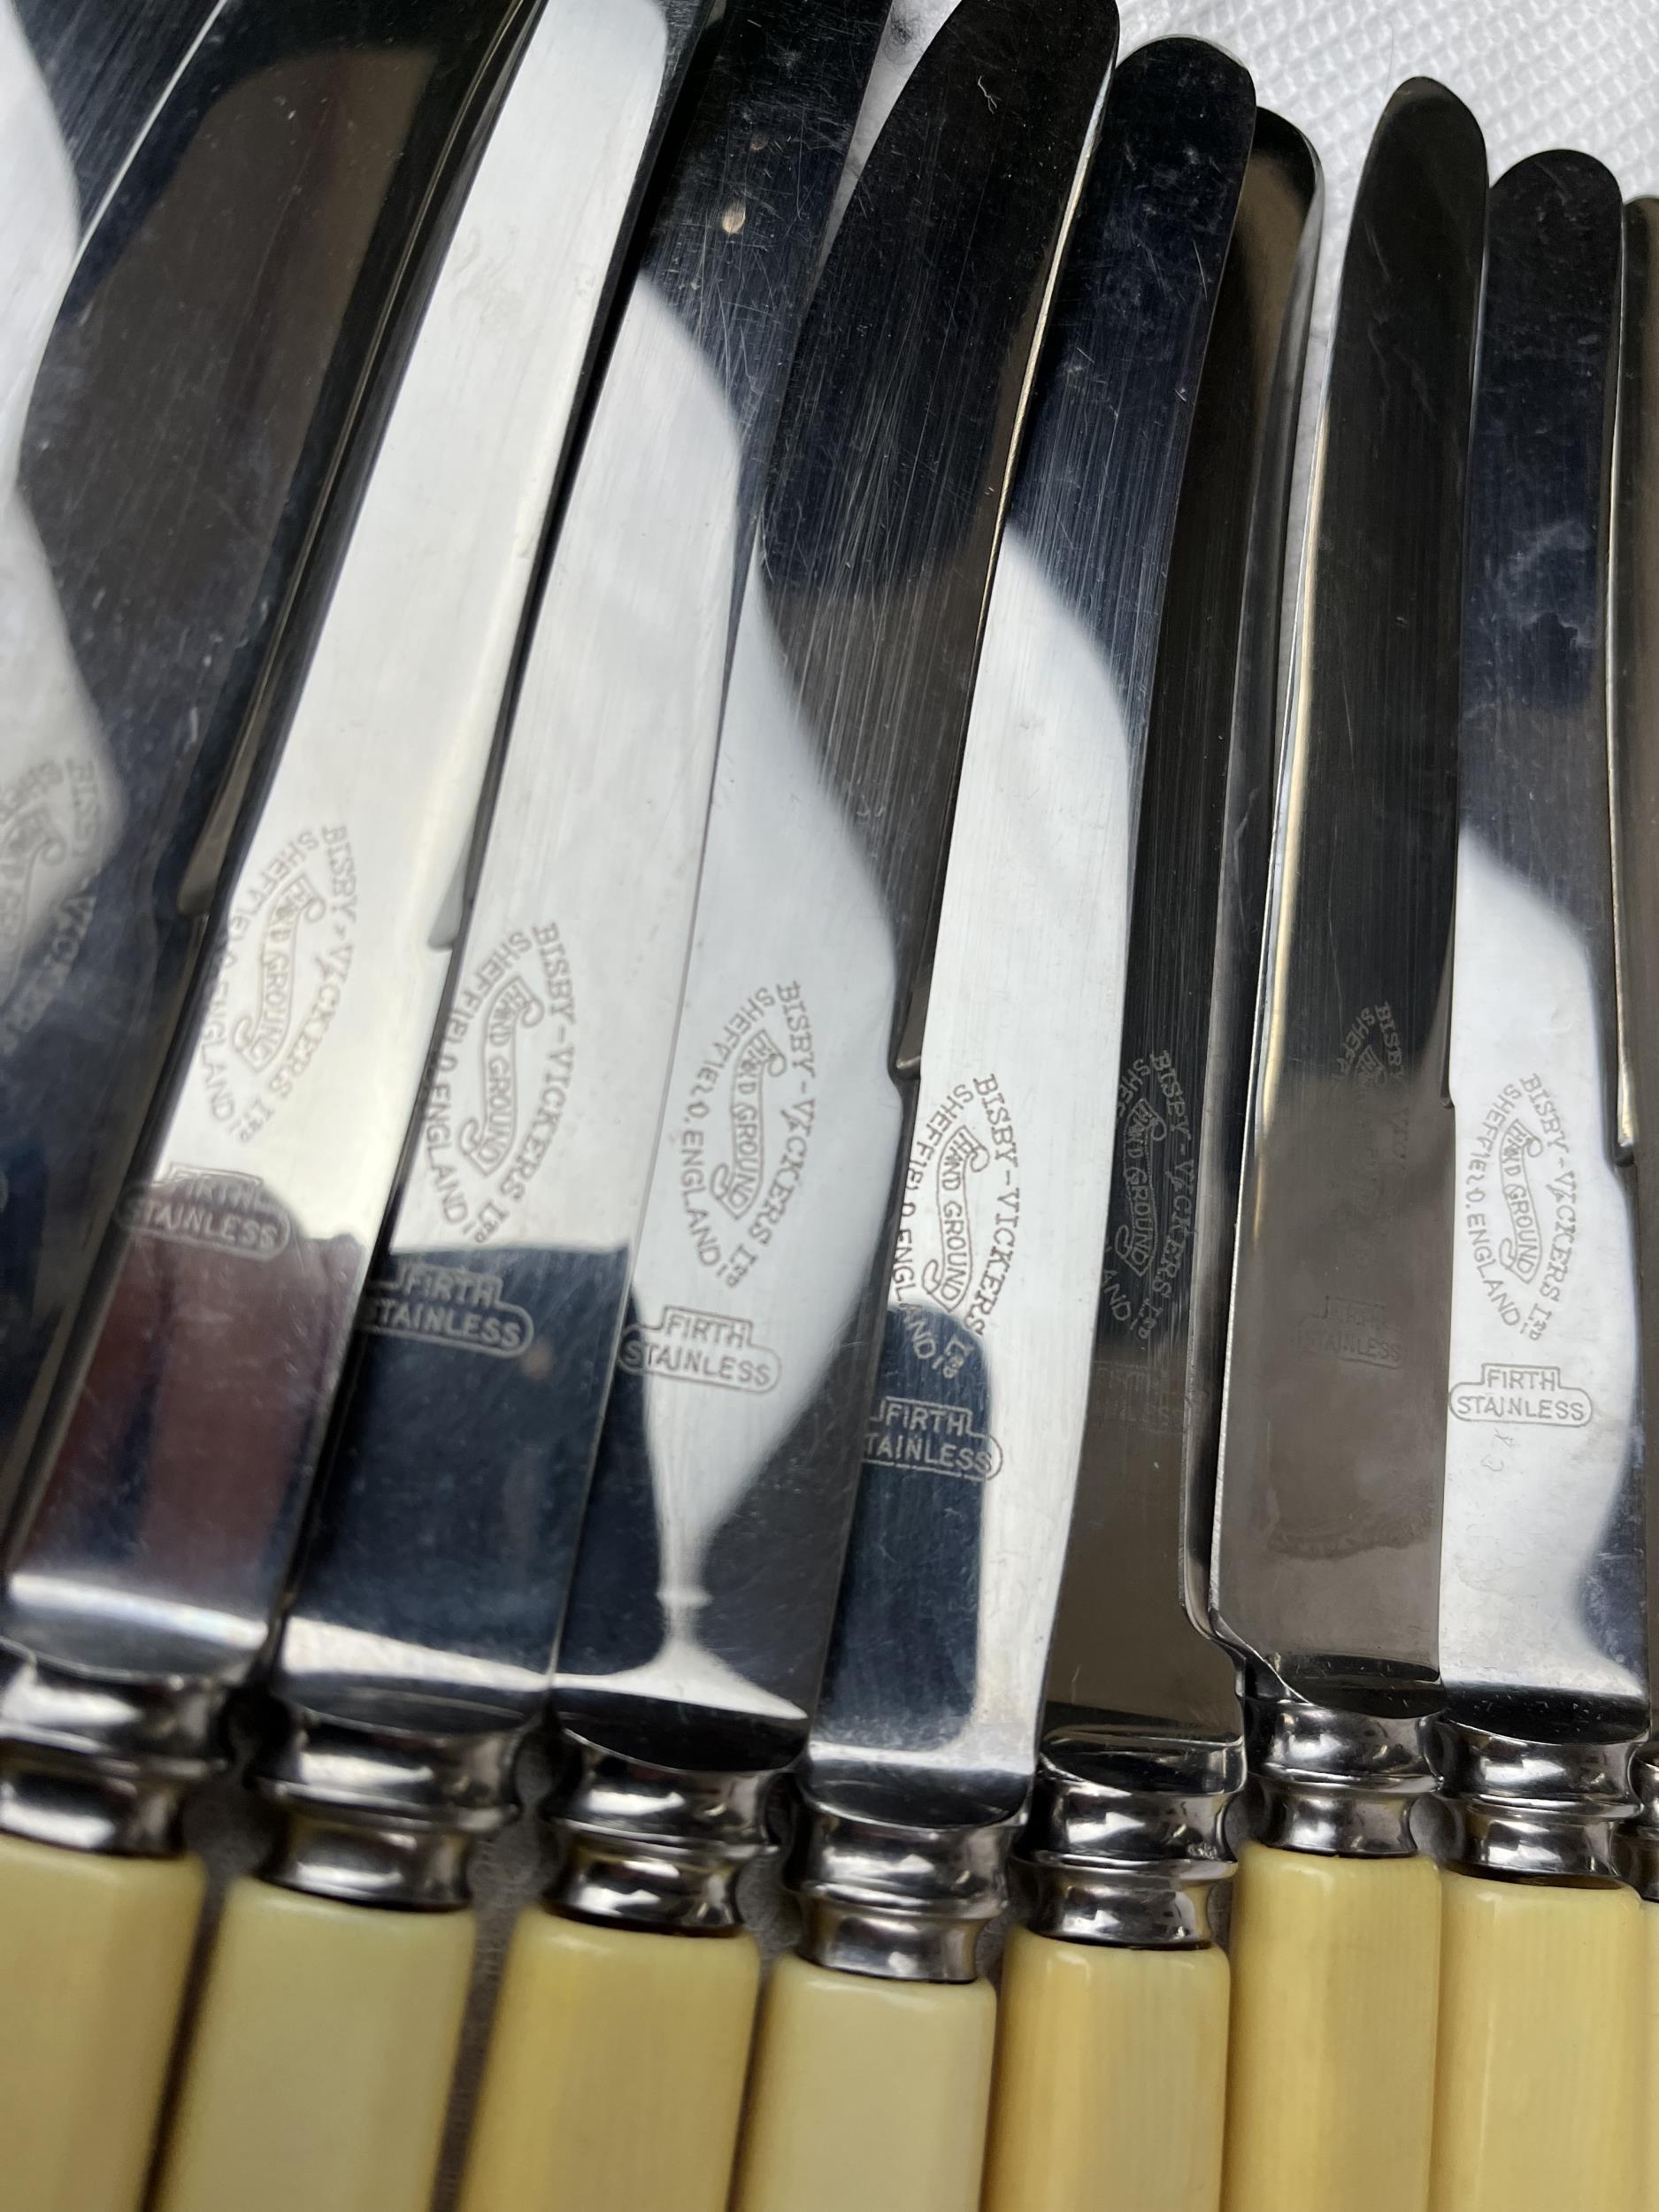 An extensive set of silver plated cutlery along with bone handled knives. - Image 5 of 6